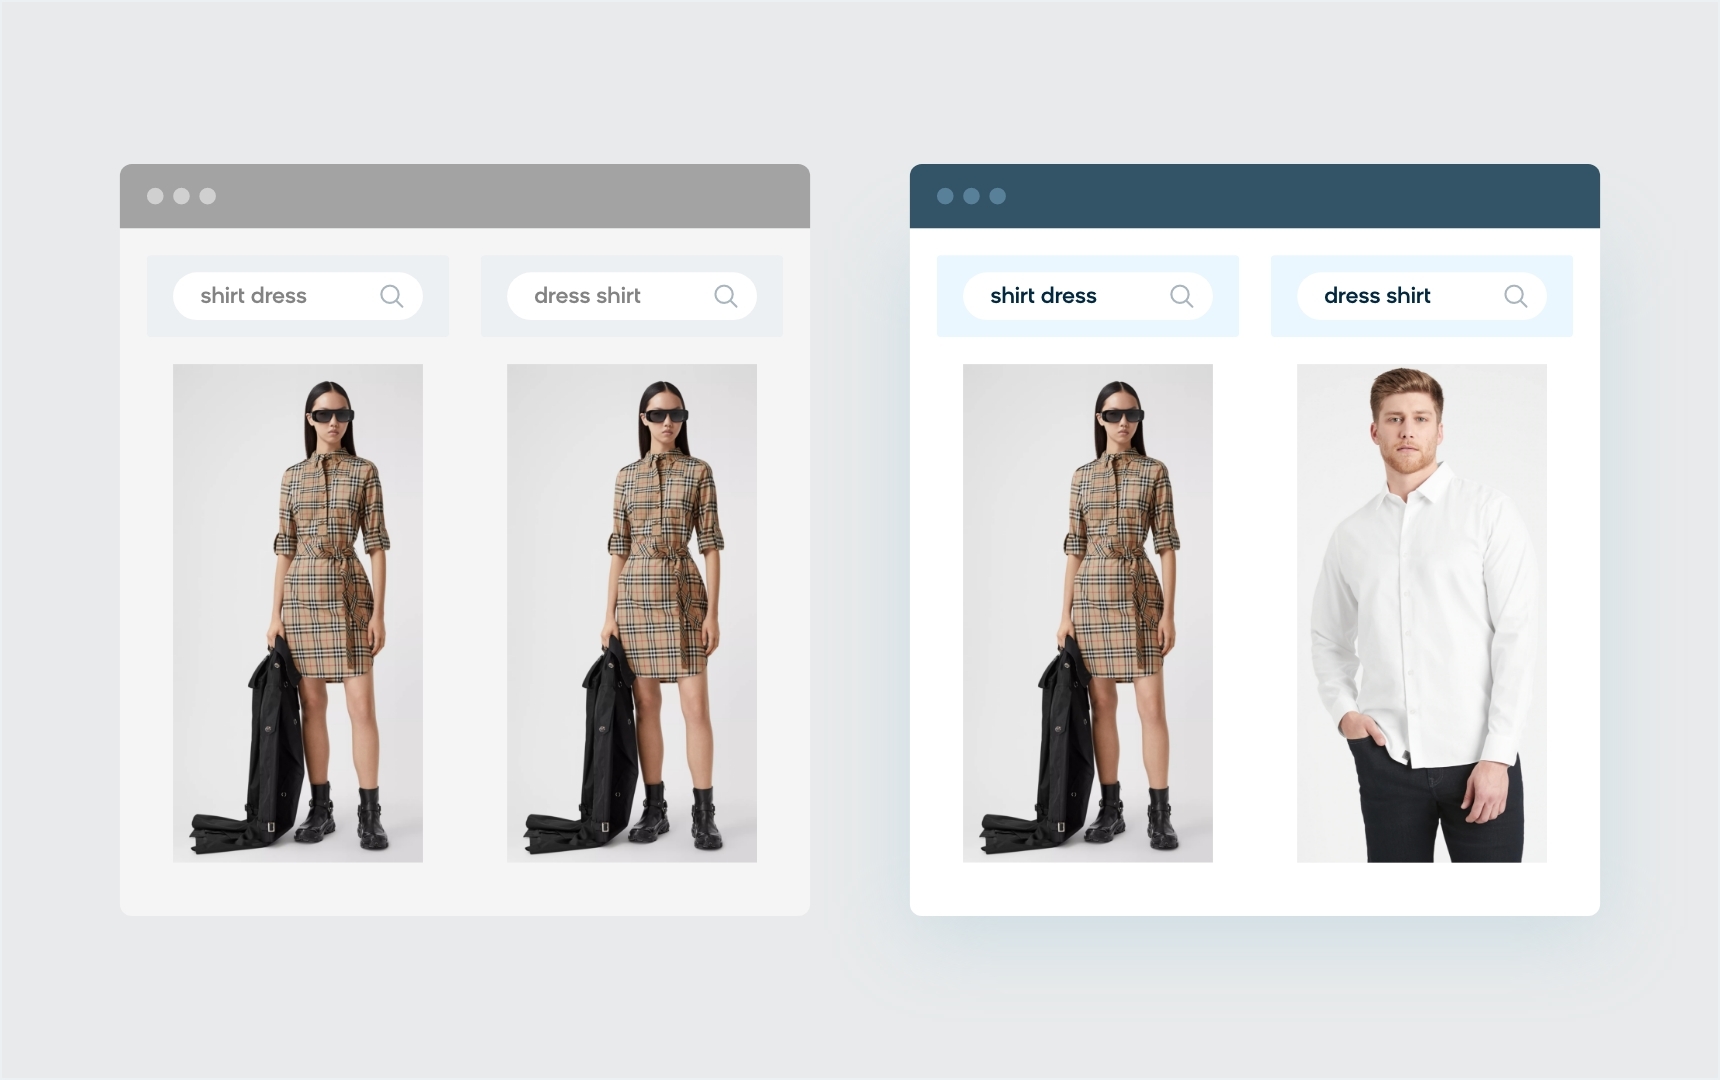 Site search understanding the difference between "shirt dress" and "dress shirt"